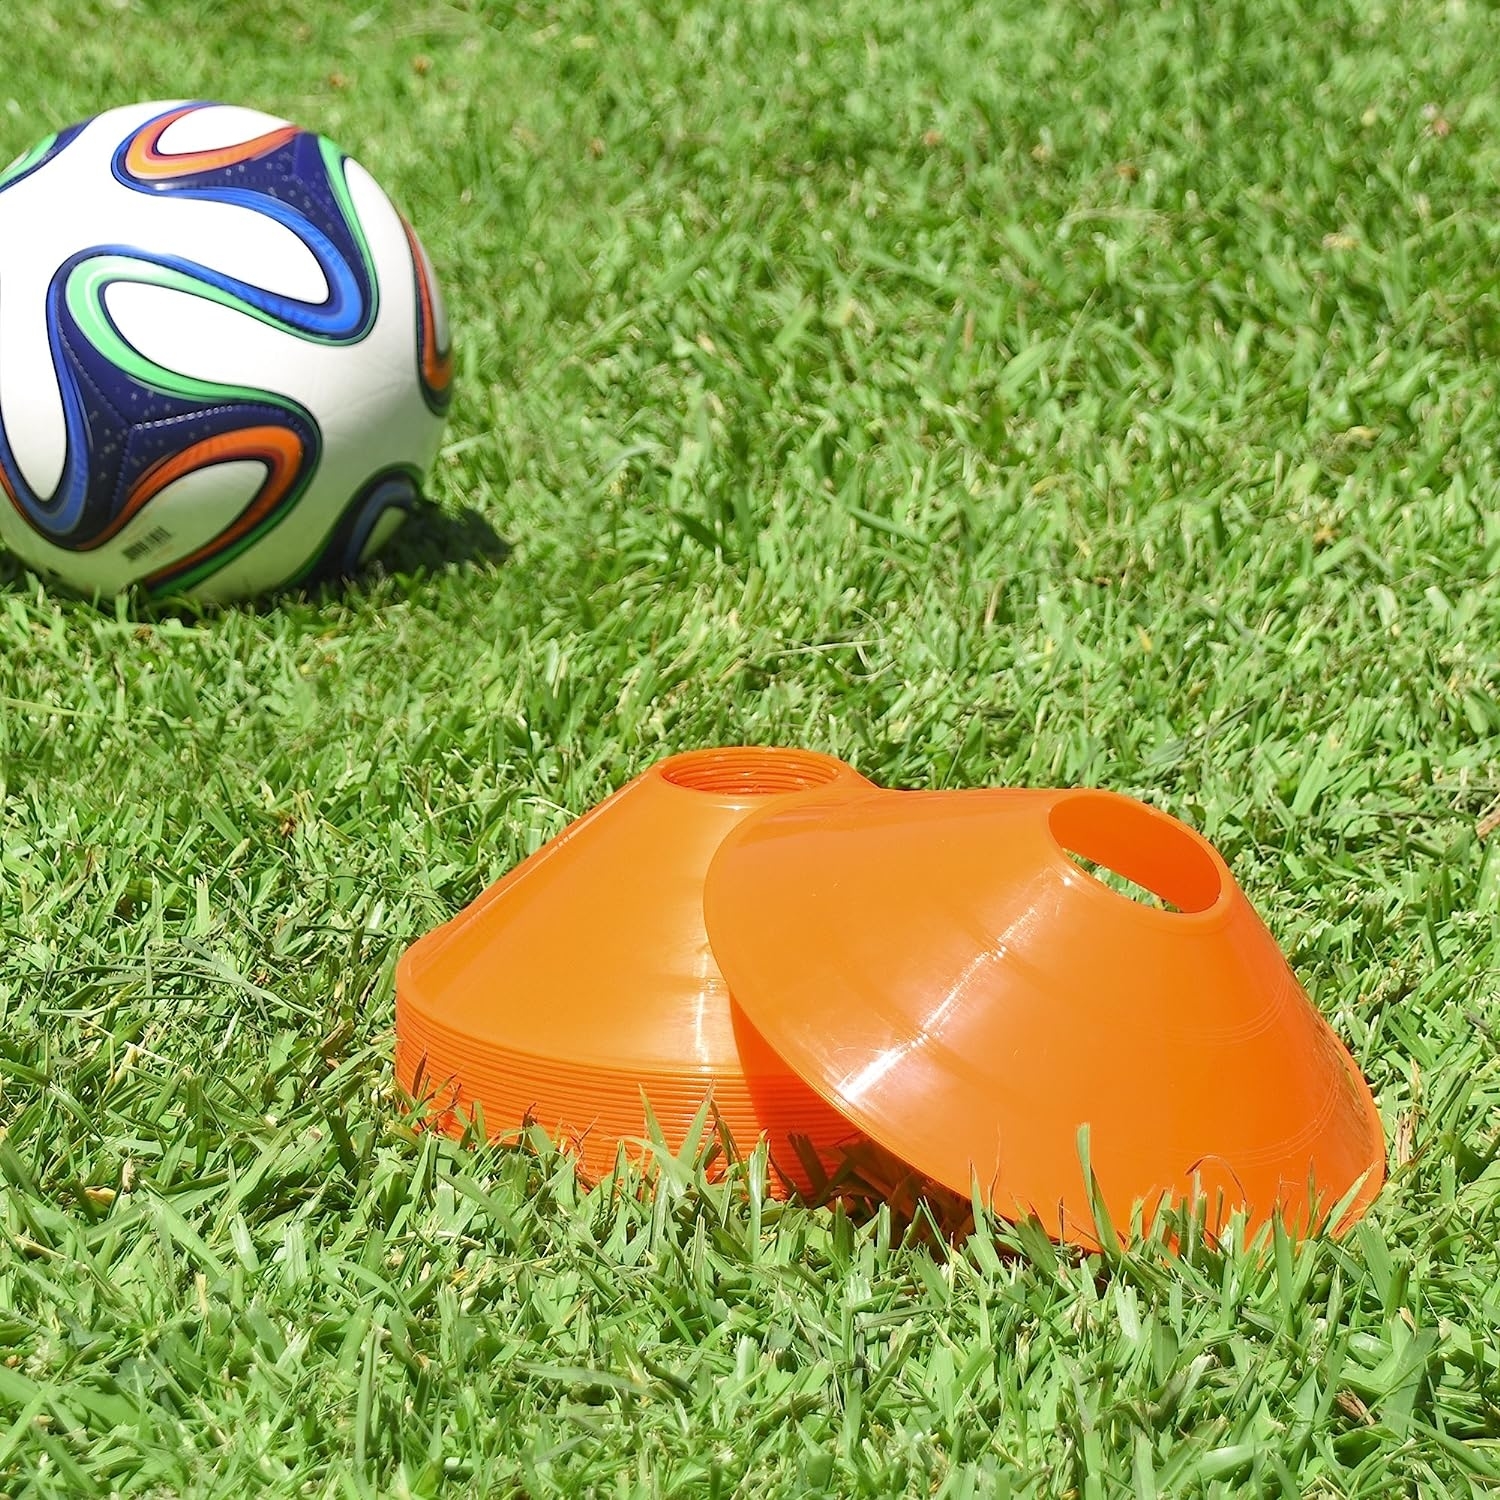 Stack of orange training cones next to soccer ball on grass